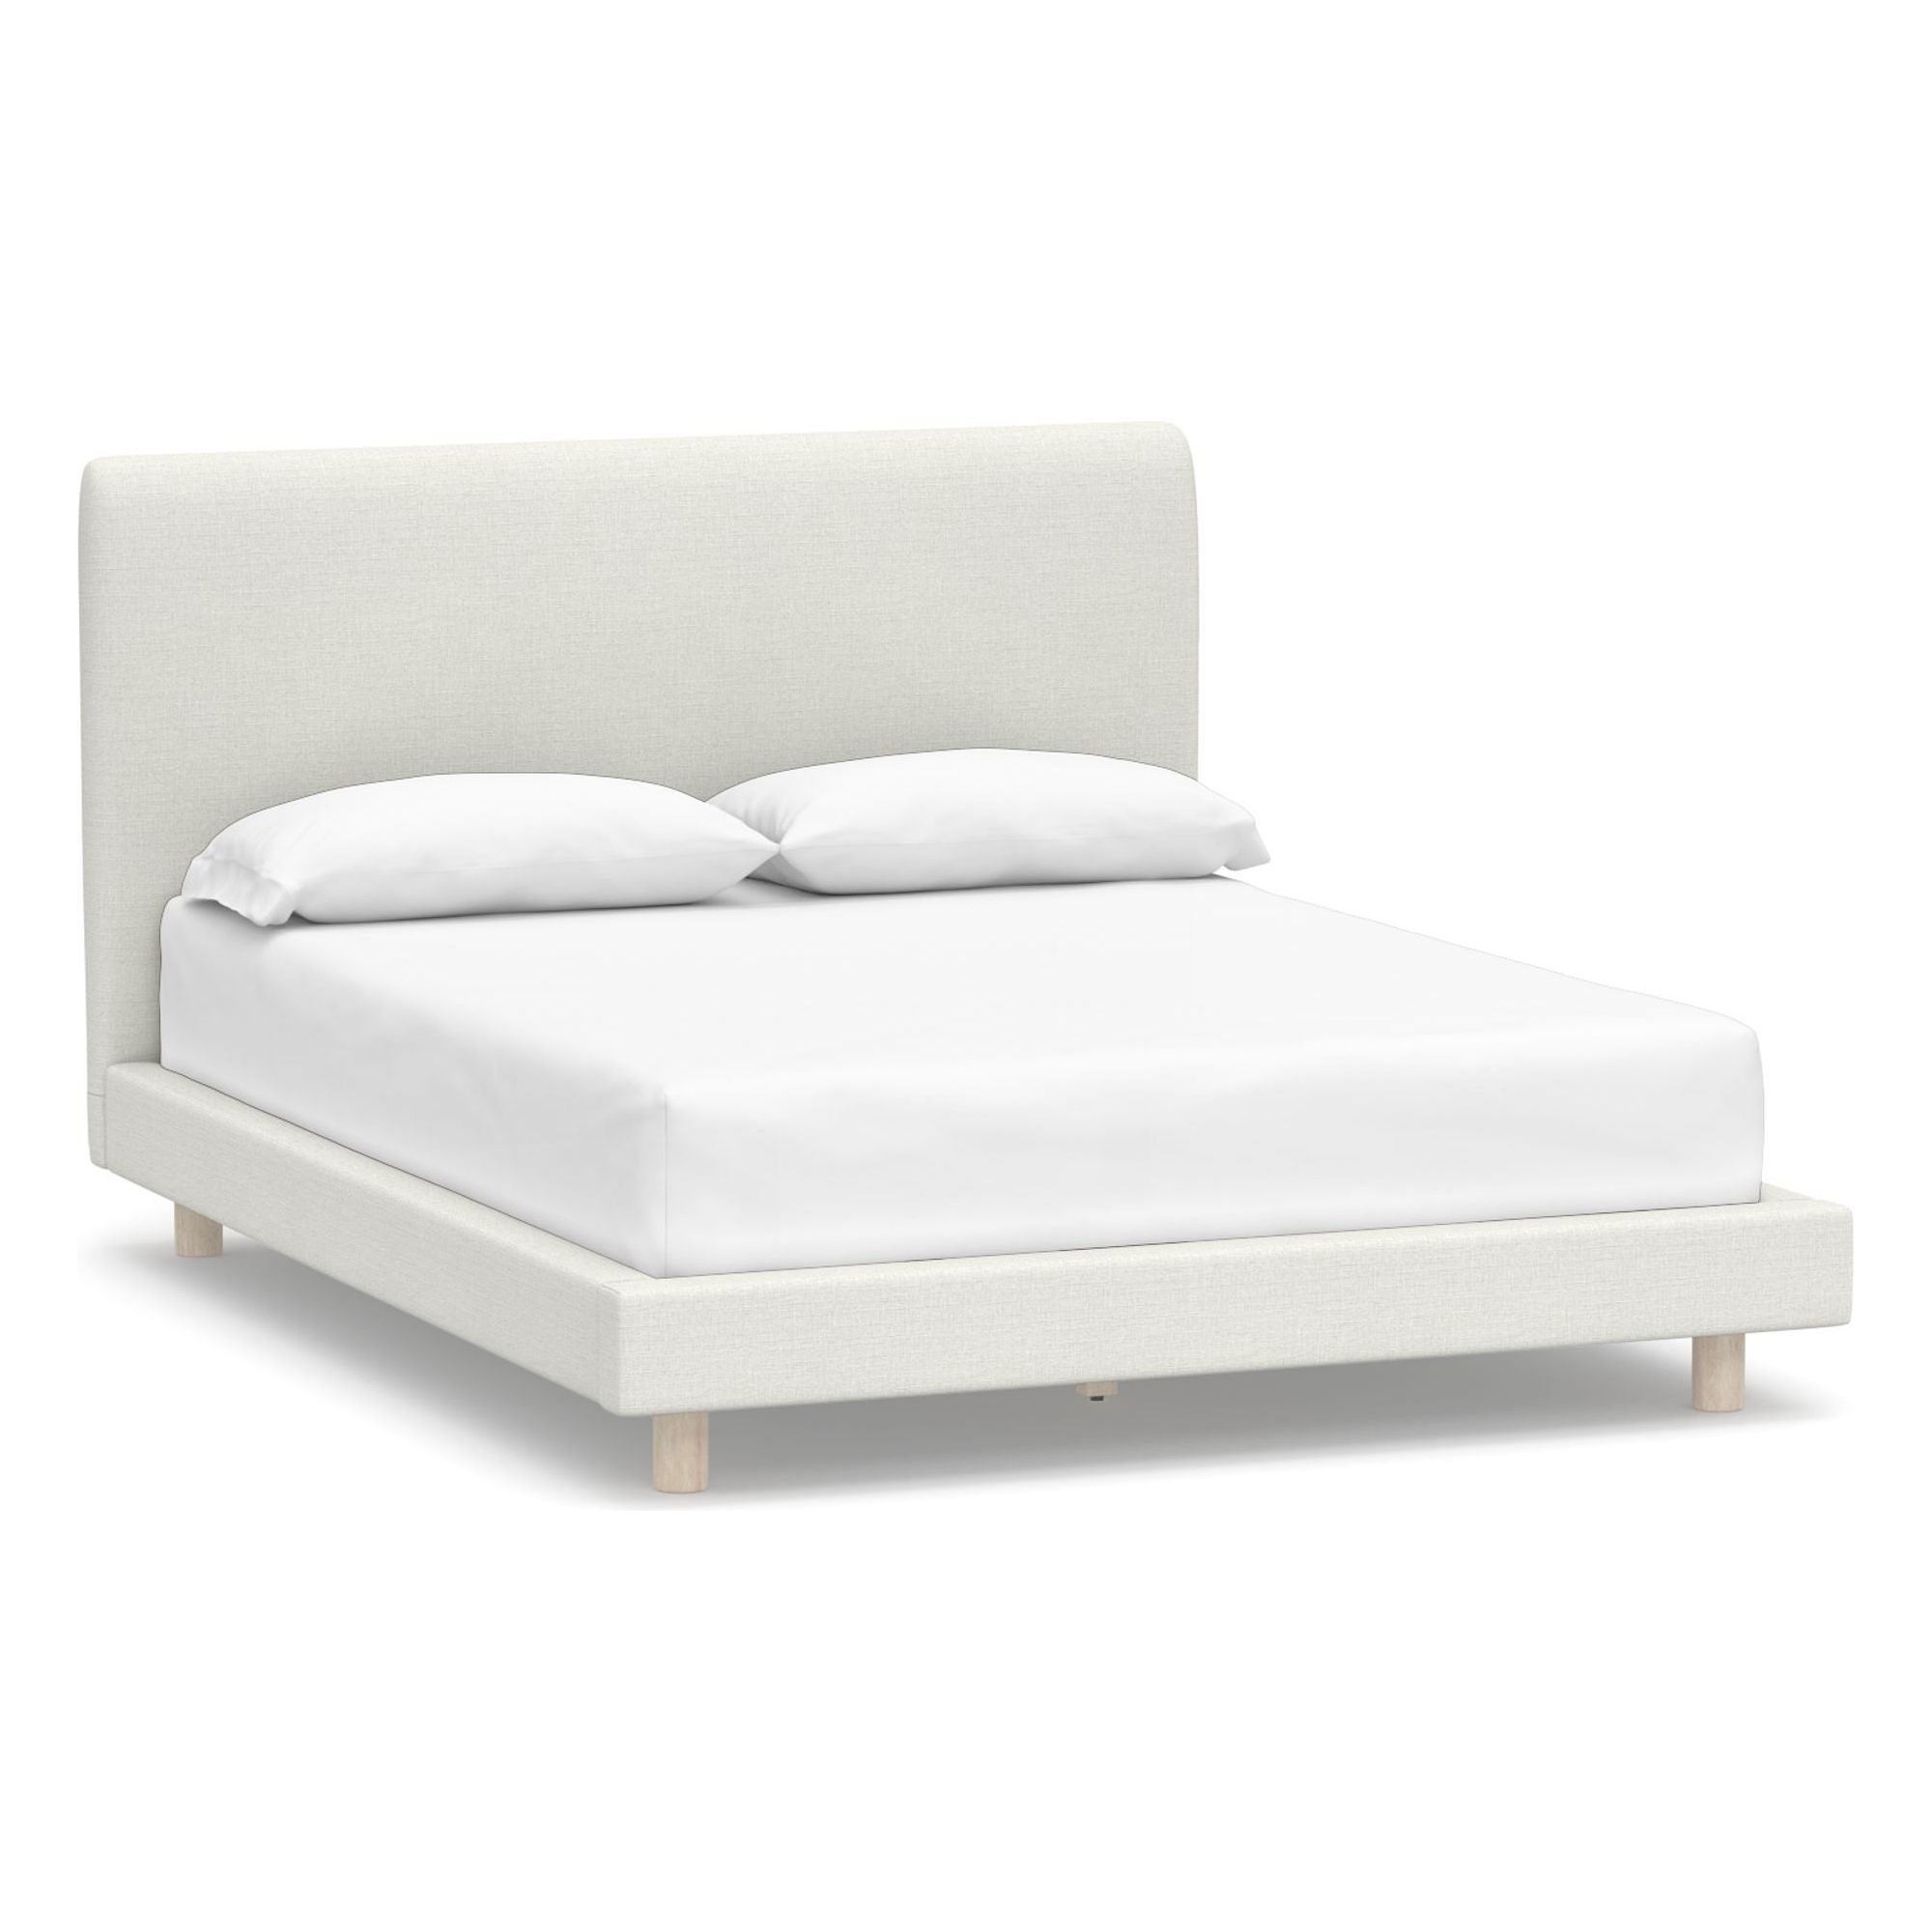 Cayman Upholstered Bed - Quick Ship - Queen - Ivory